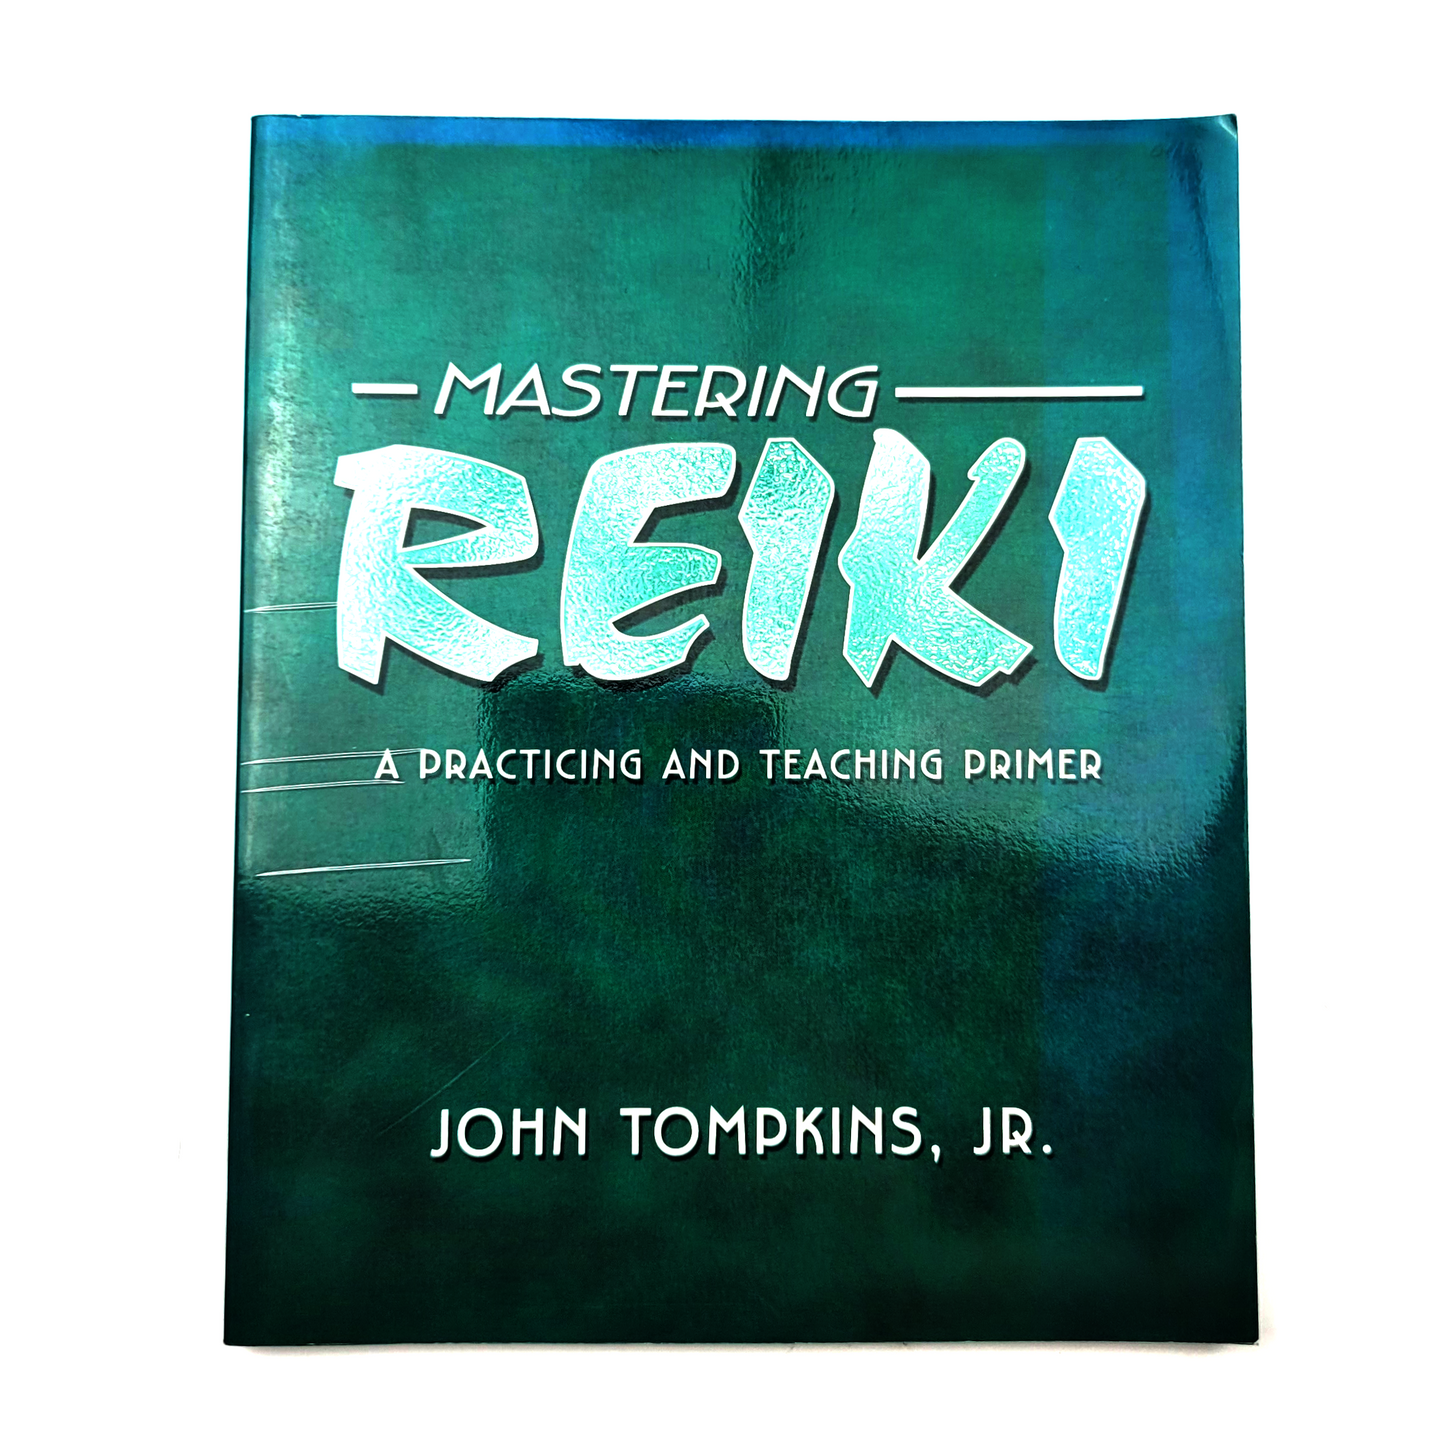 Mastering Reiki: A Practicing and Teaching Primer by John Tompkins Jr